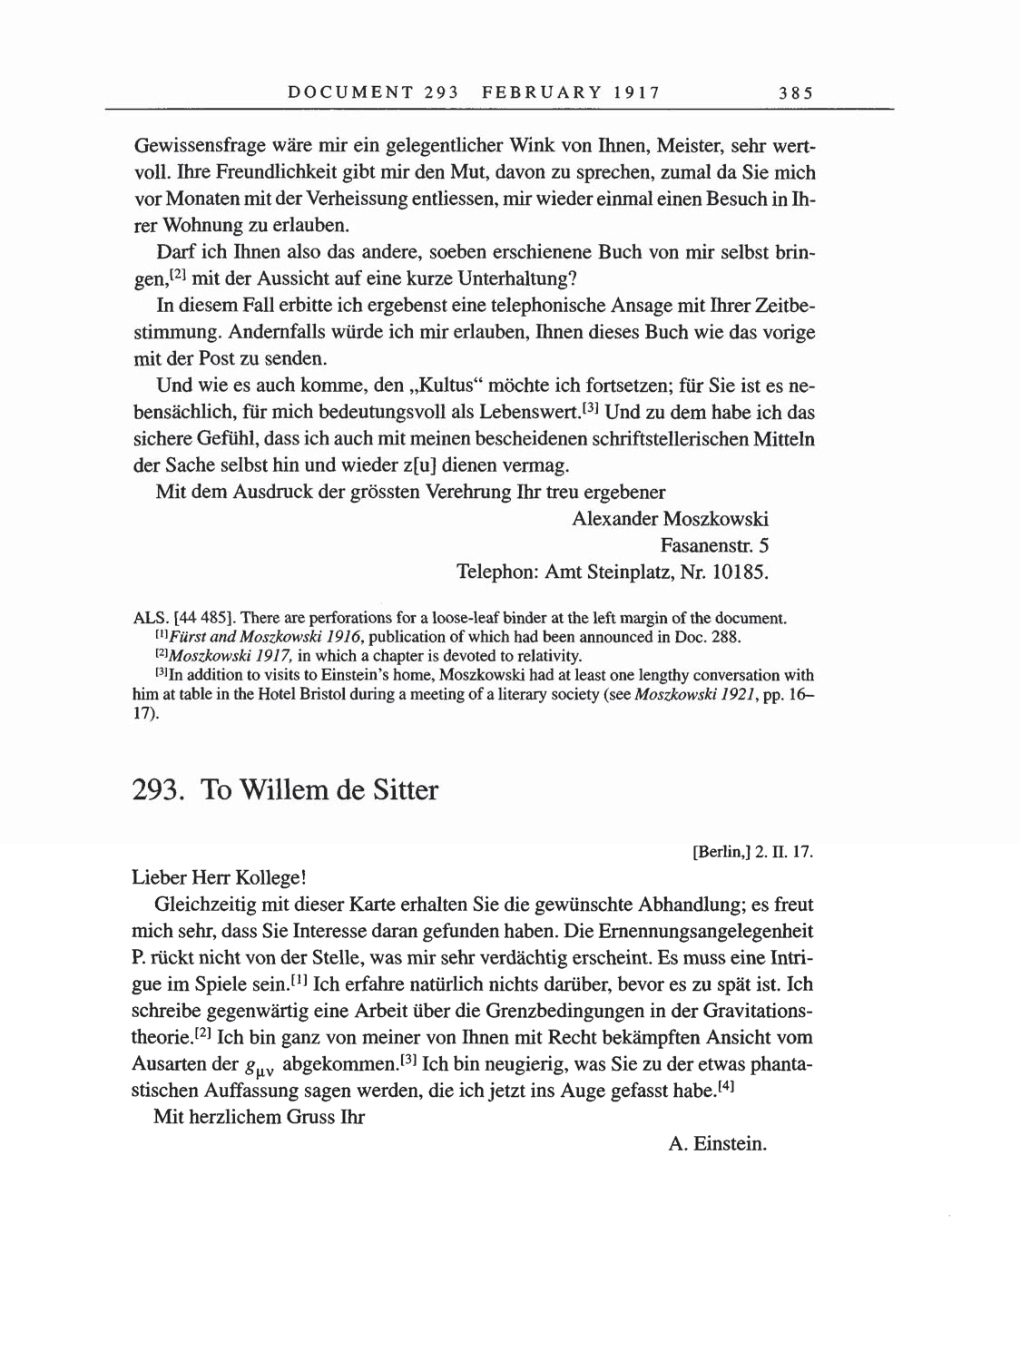 Volume 8, Part A: The Berlin Years: Correspondence 1914-1917 page 385